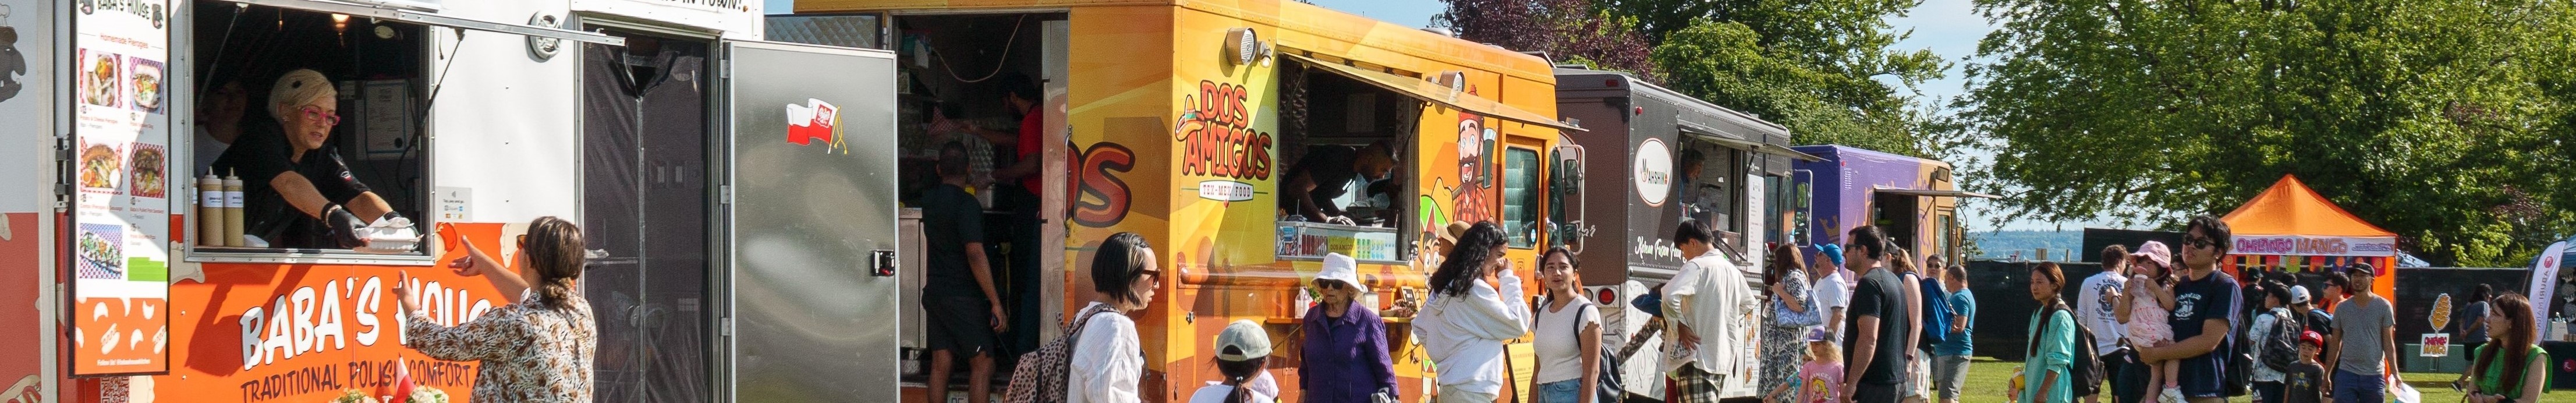 The image shows a group of people walking around a food truck. The food truck appears to offer traditional Polish comfort food. The setting is an outdoor international lounge with food trucks from different countries.